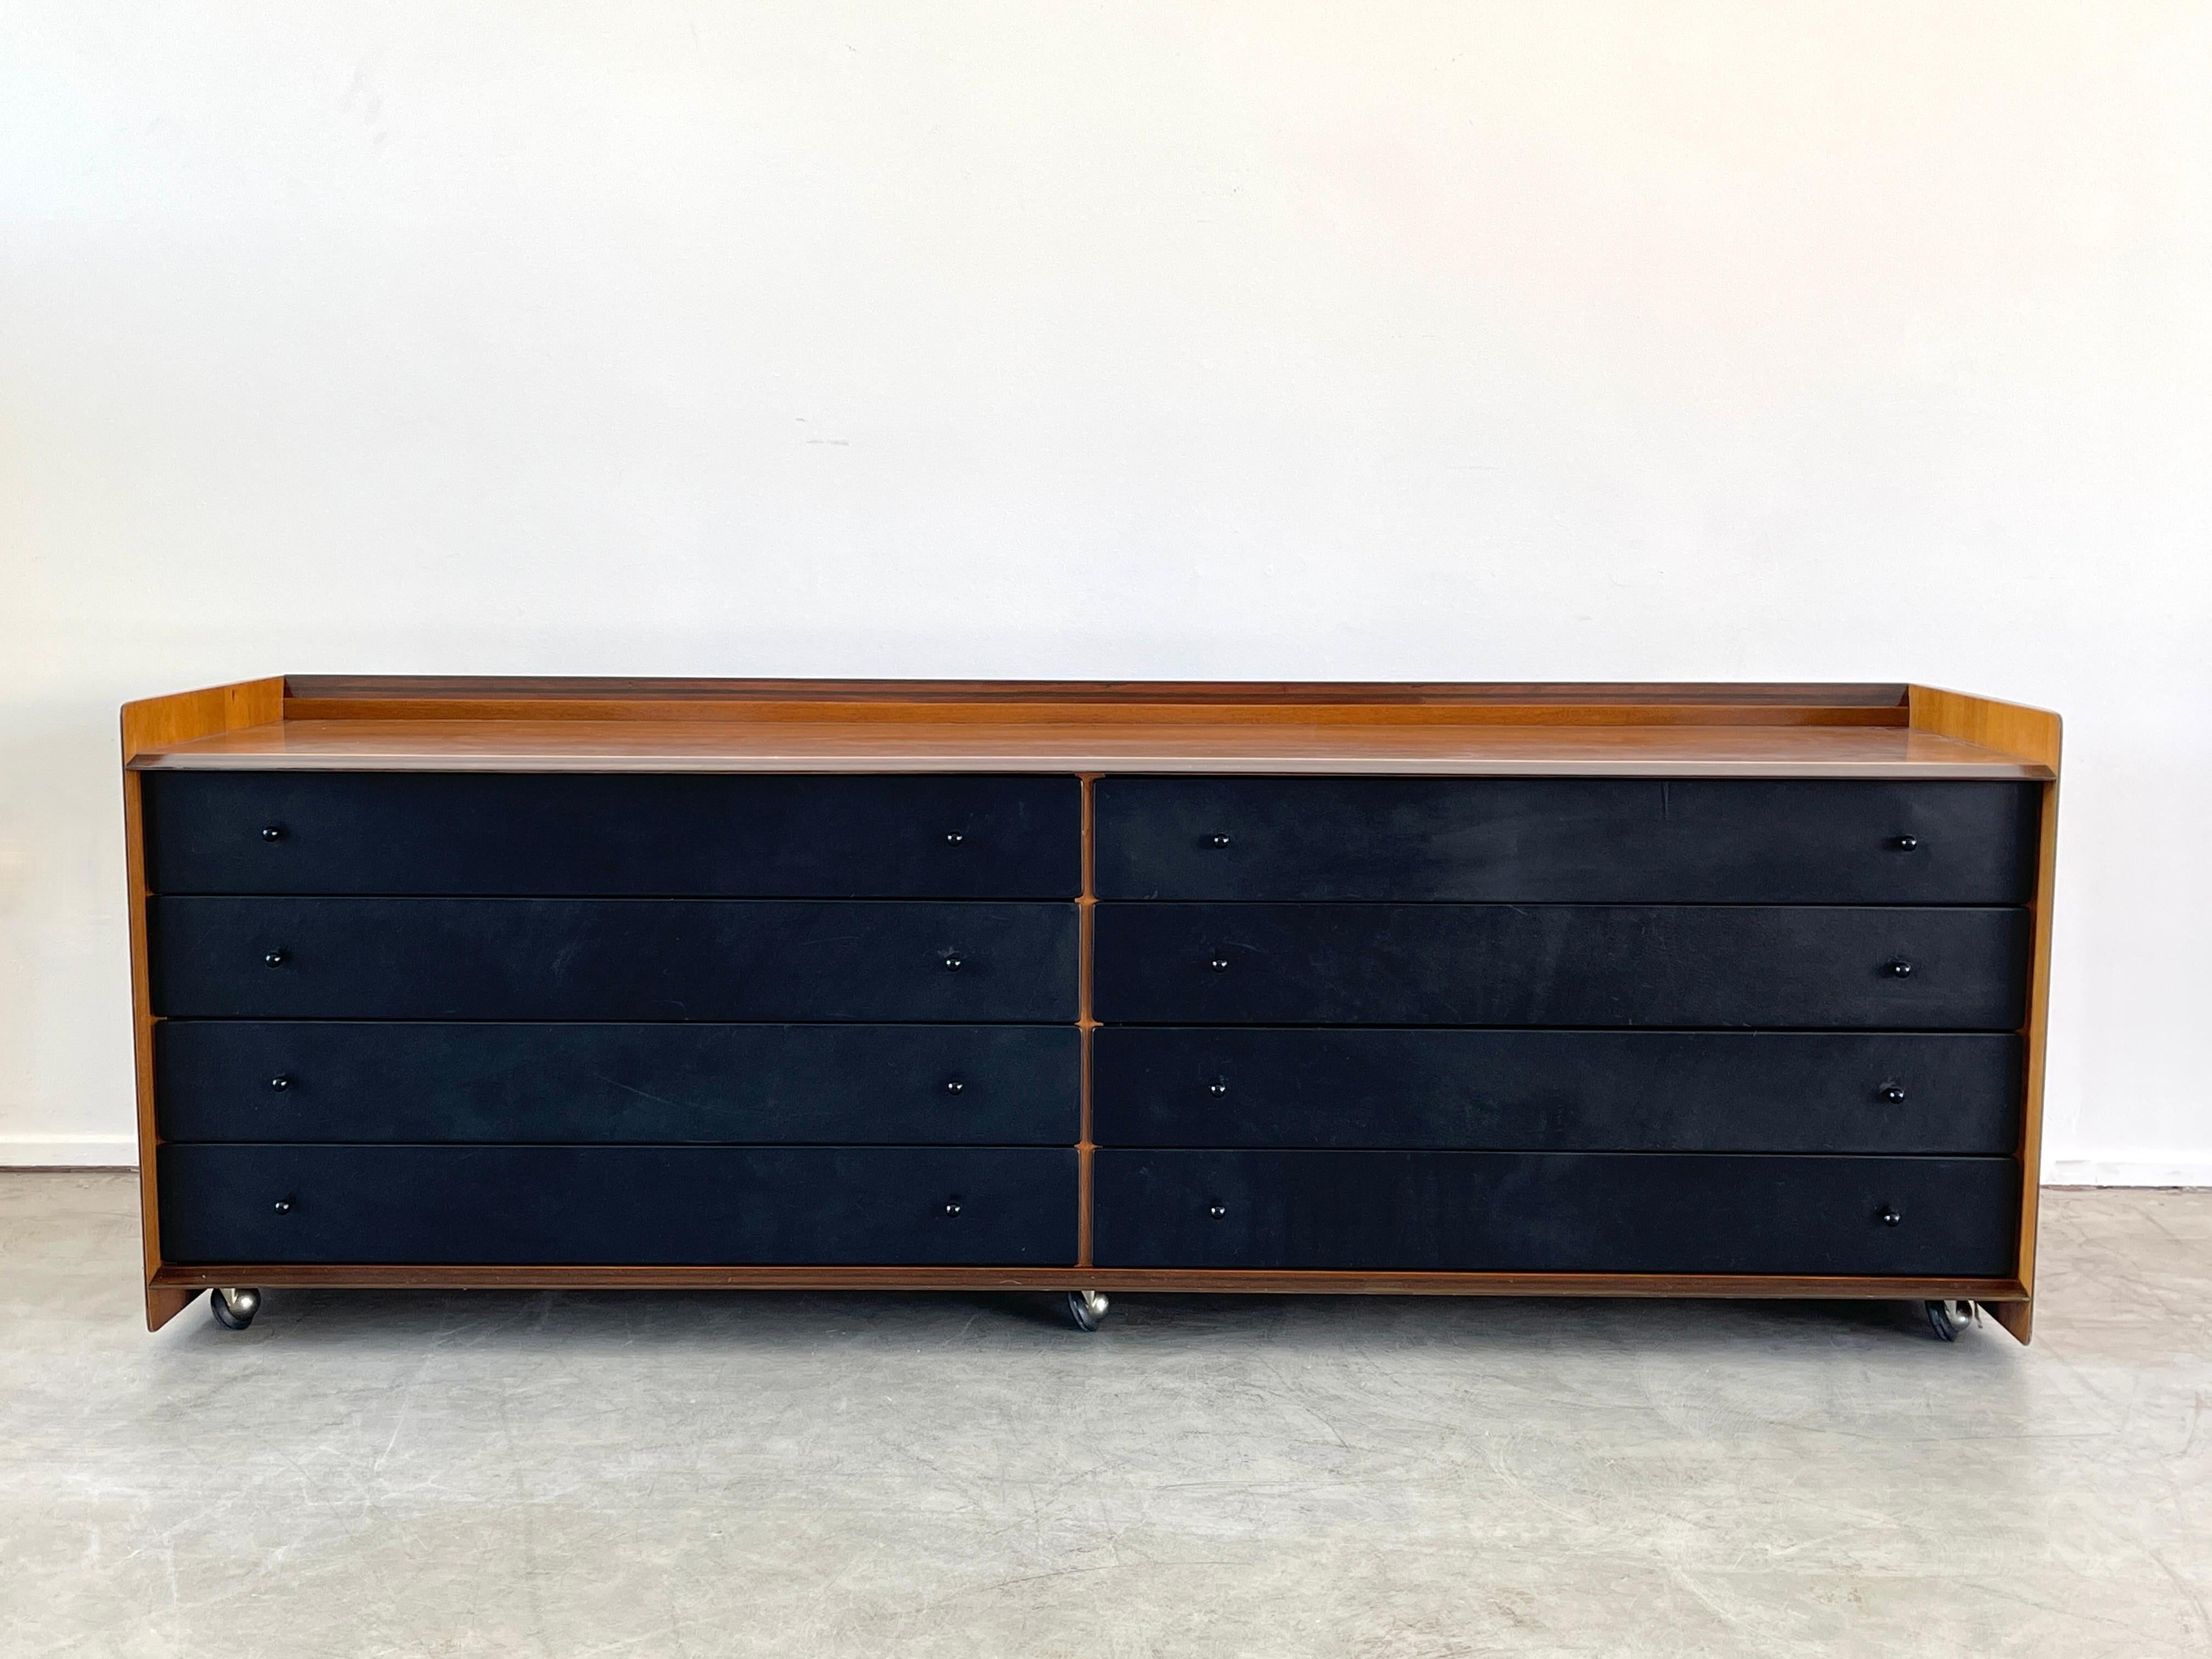 Chest of drawers by Afra & Tobia Scarpa in walnut and black leather drawers, Italy, circa 1970s 
Beautiful grain in walnut with wood inlay 
Cabinet sits on original chrome casters. 

